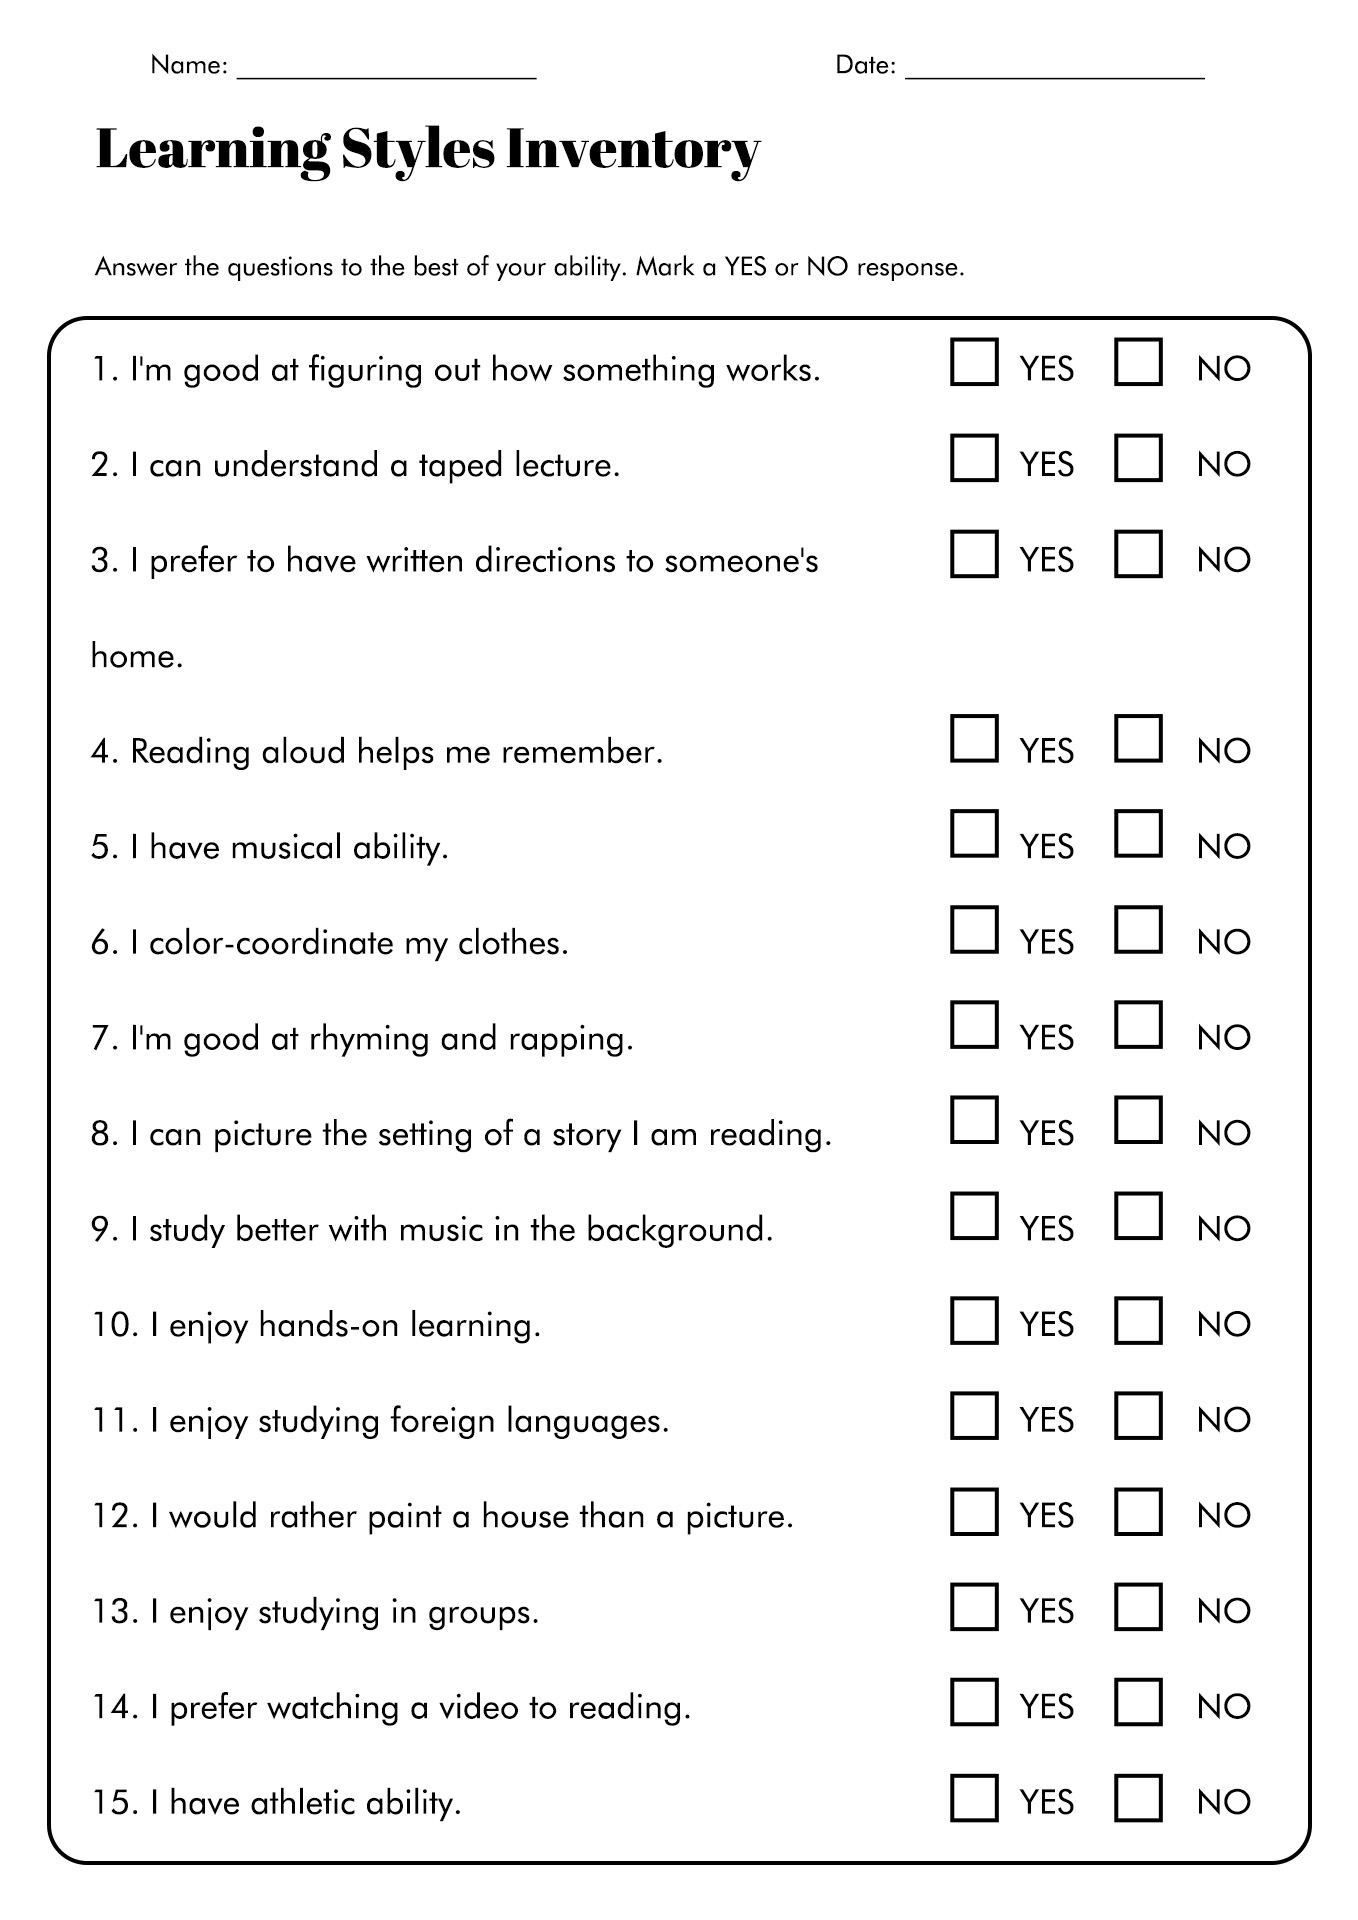 7 Learning Styles Quiz Printable